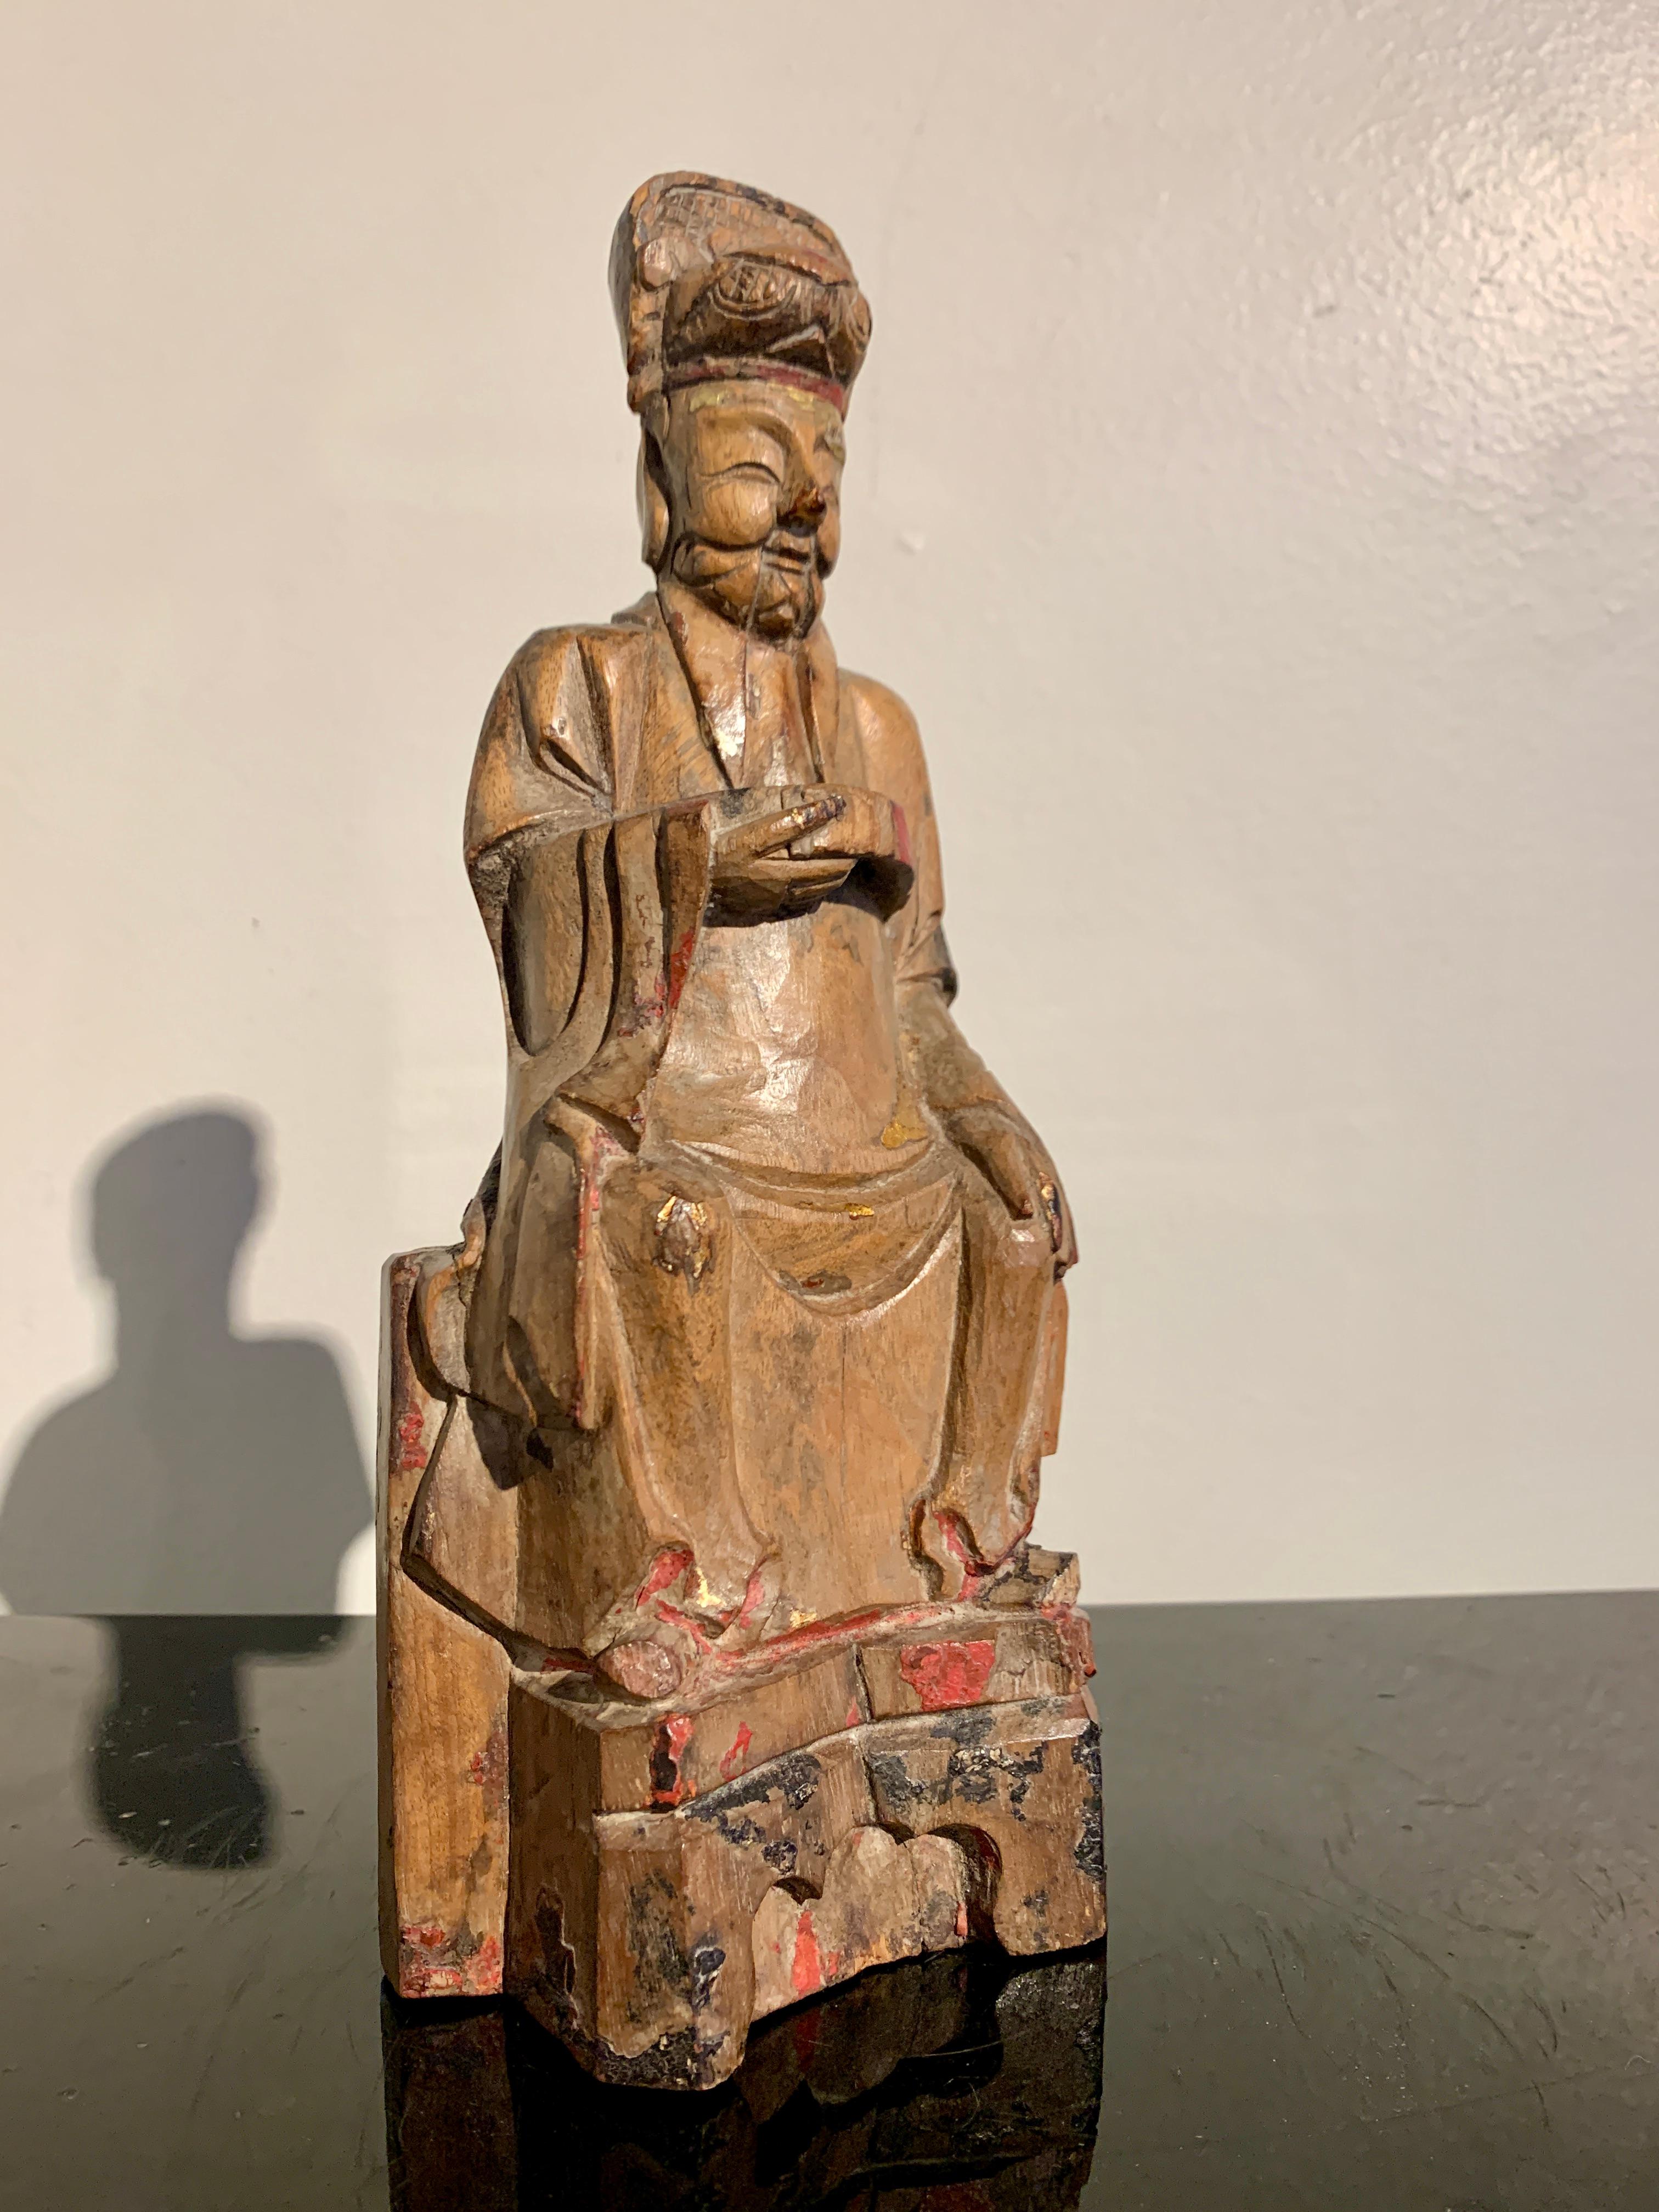 A charming Chinese carved wood figure of a Taoist deity, possibly for a home or personal shrine, late Ming or early Qing Dynasty, mid 17th century, Southern China. 

The unidentified Taoist deity has been nicely carved. His face grandfatherly face